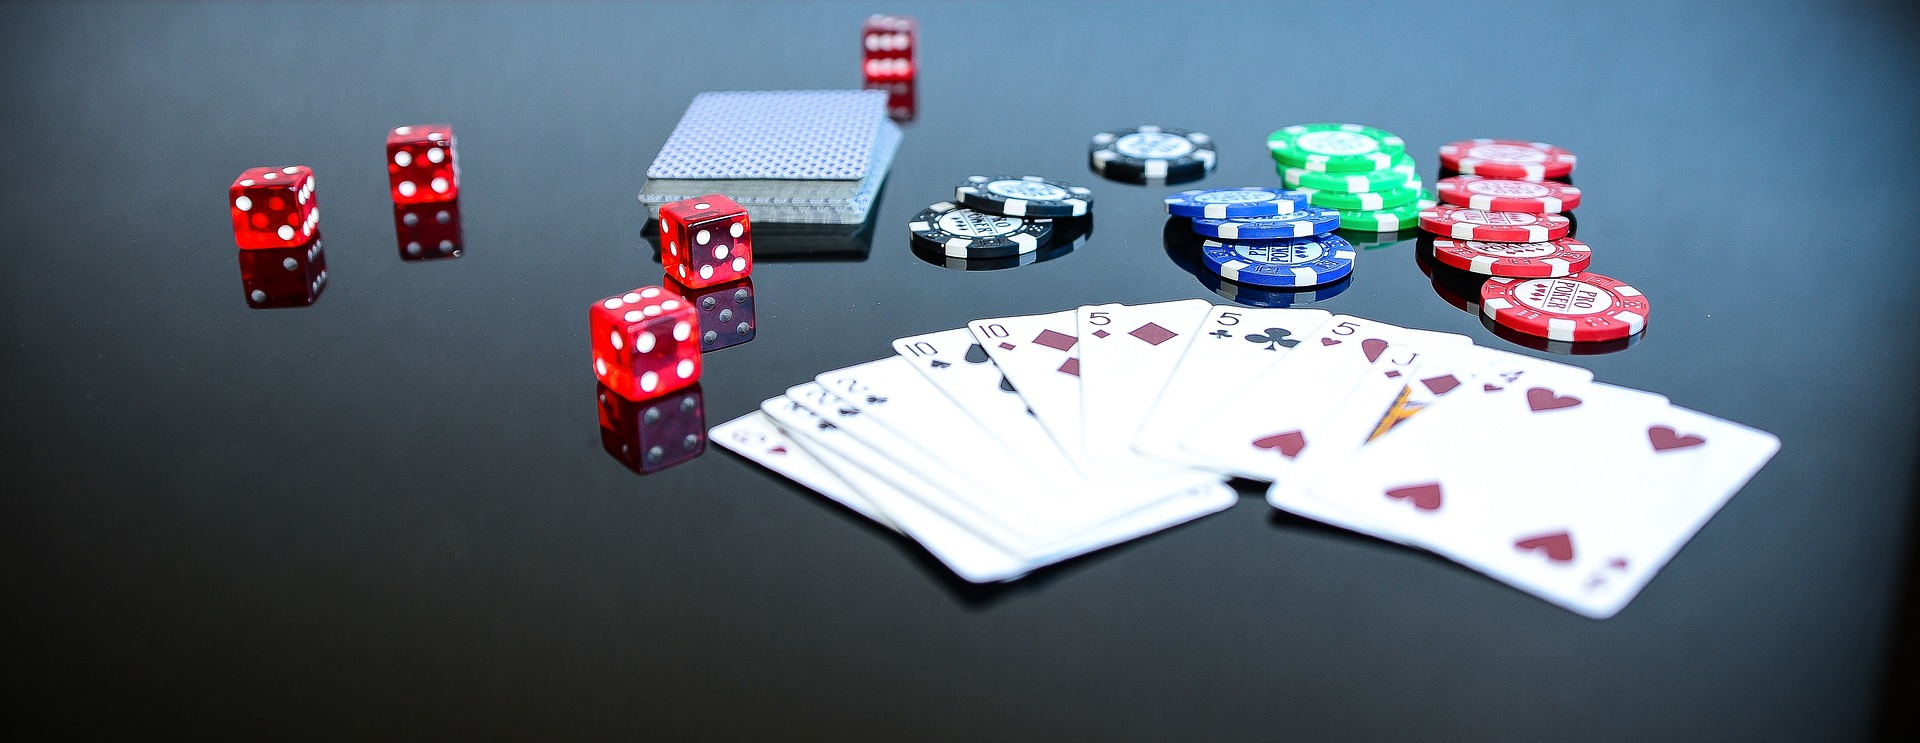 5 Best Ways To Sell bitcoin online gambling